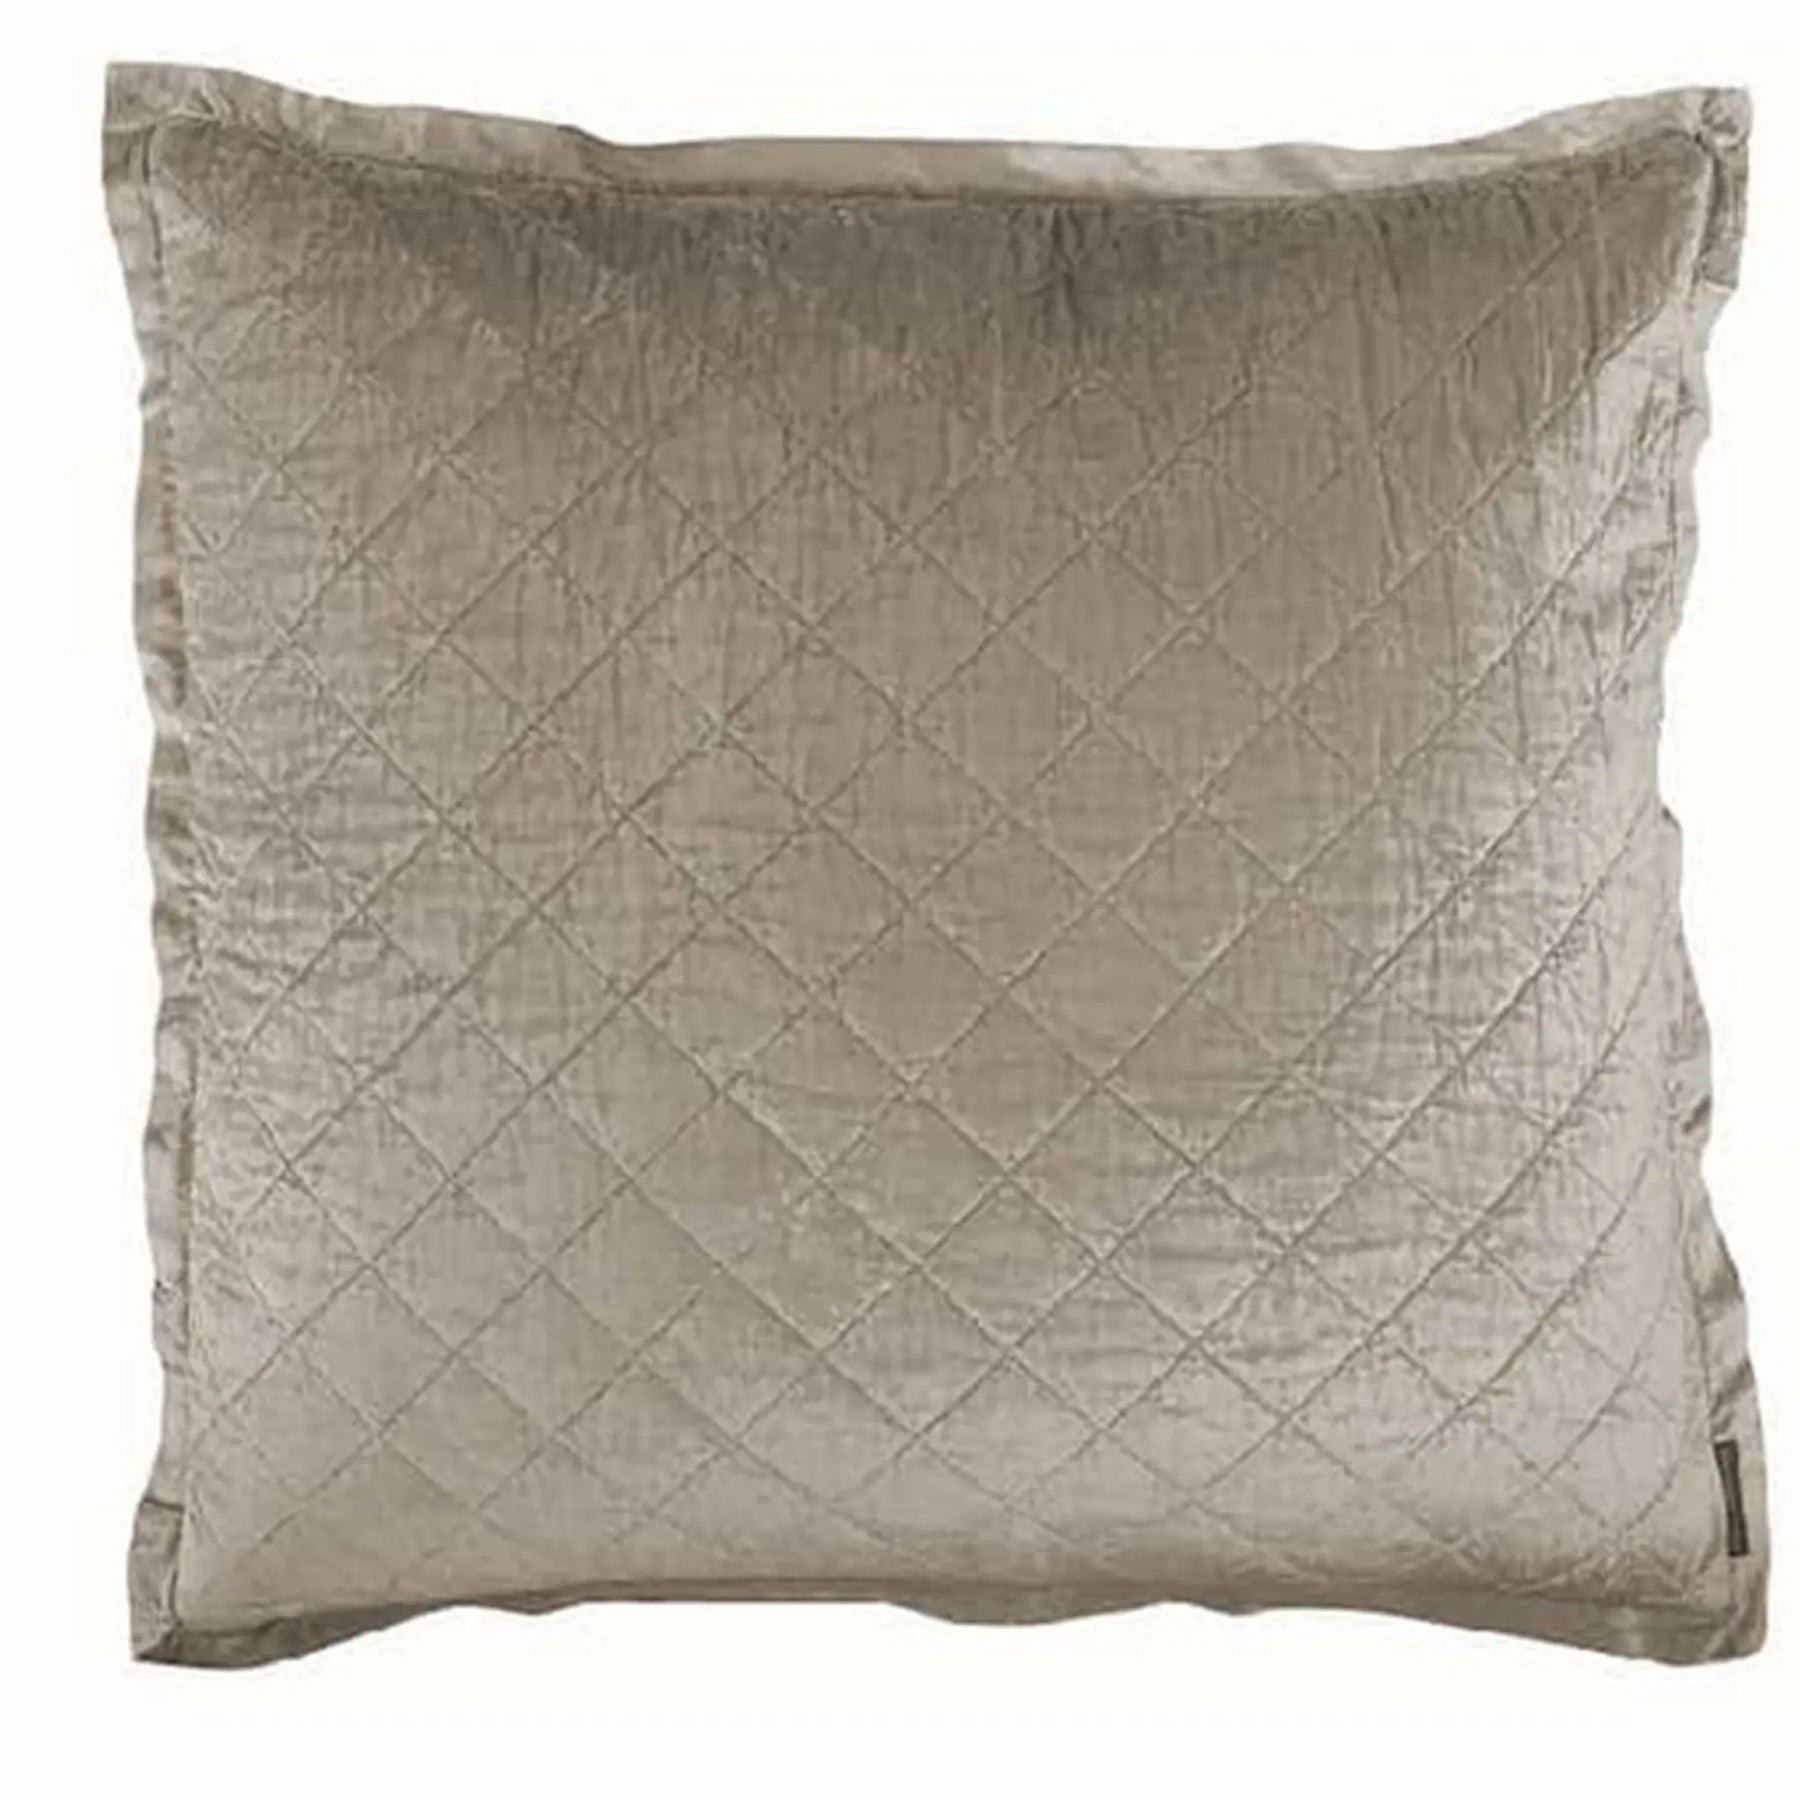 Lili Alessandra Chloe Diamond Quilted Euro Pillow in Fawn